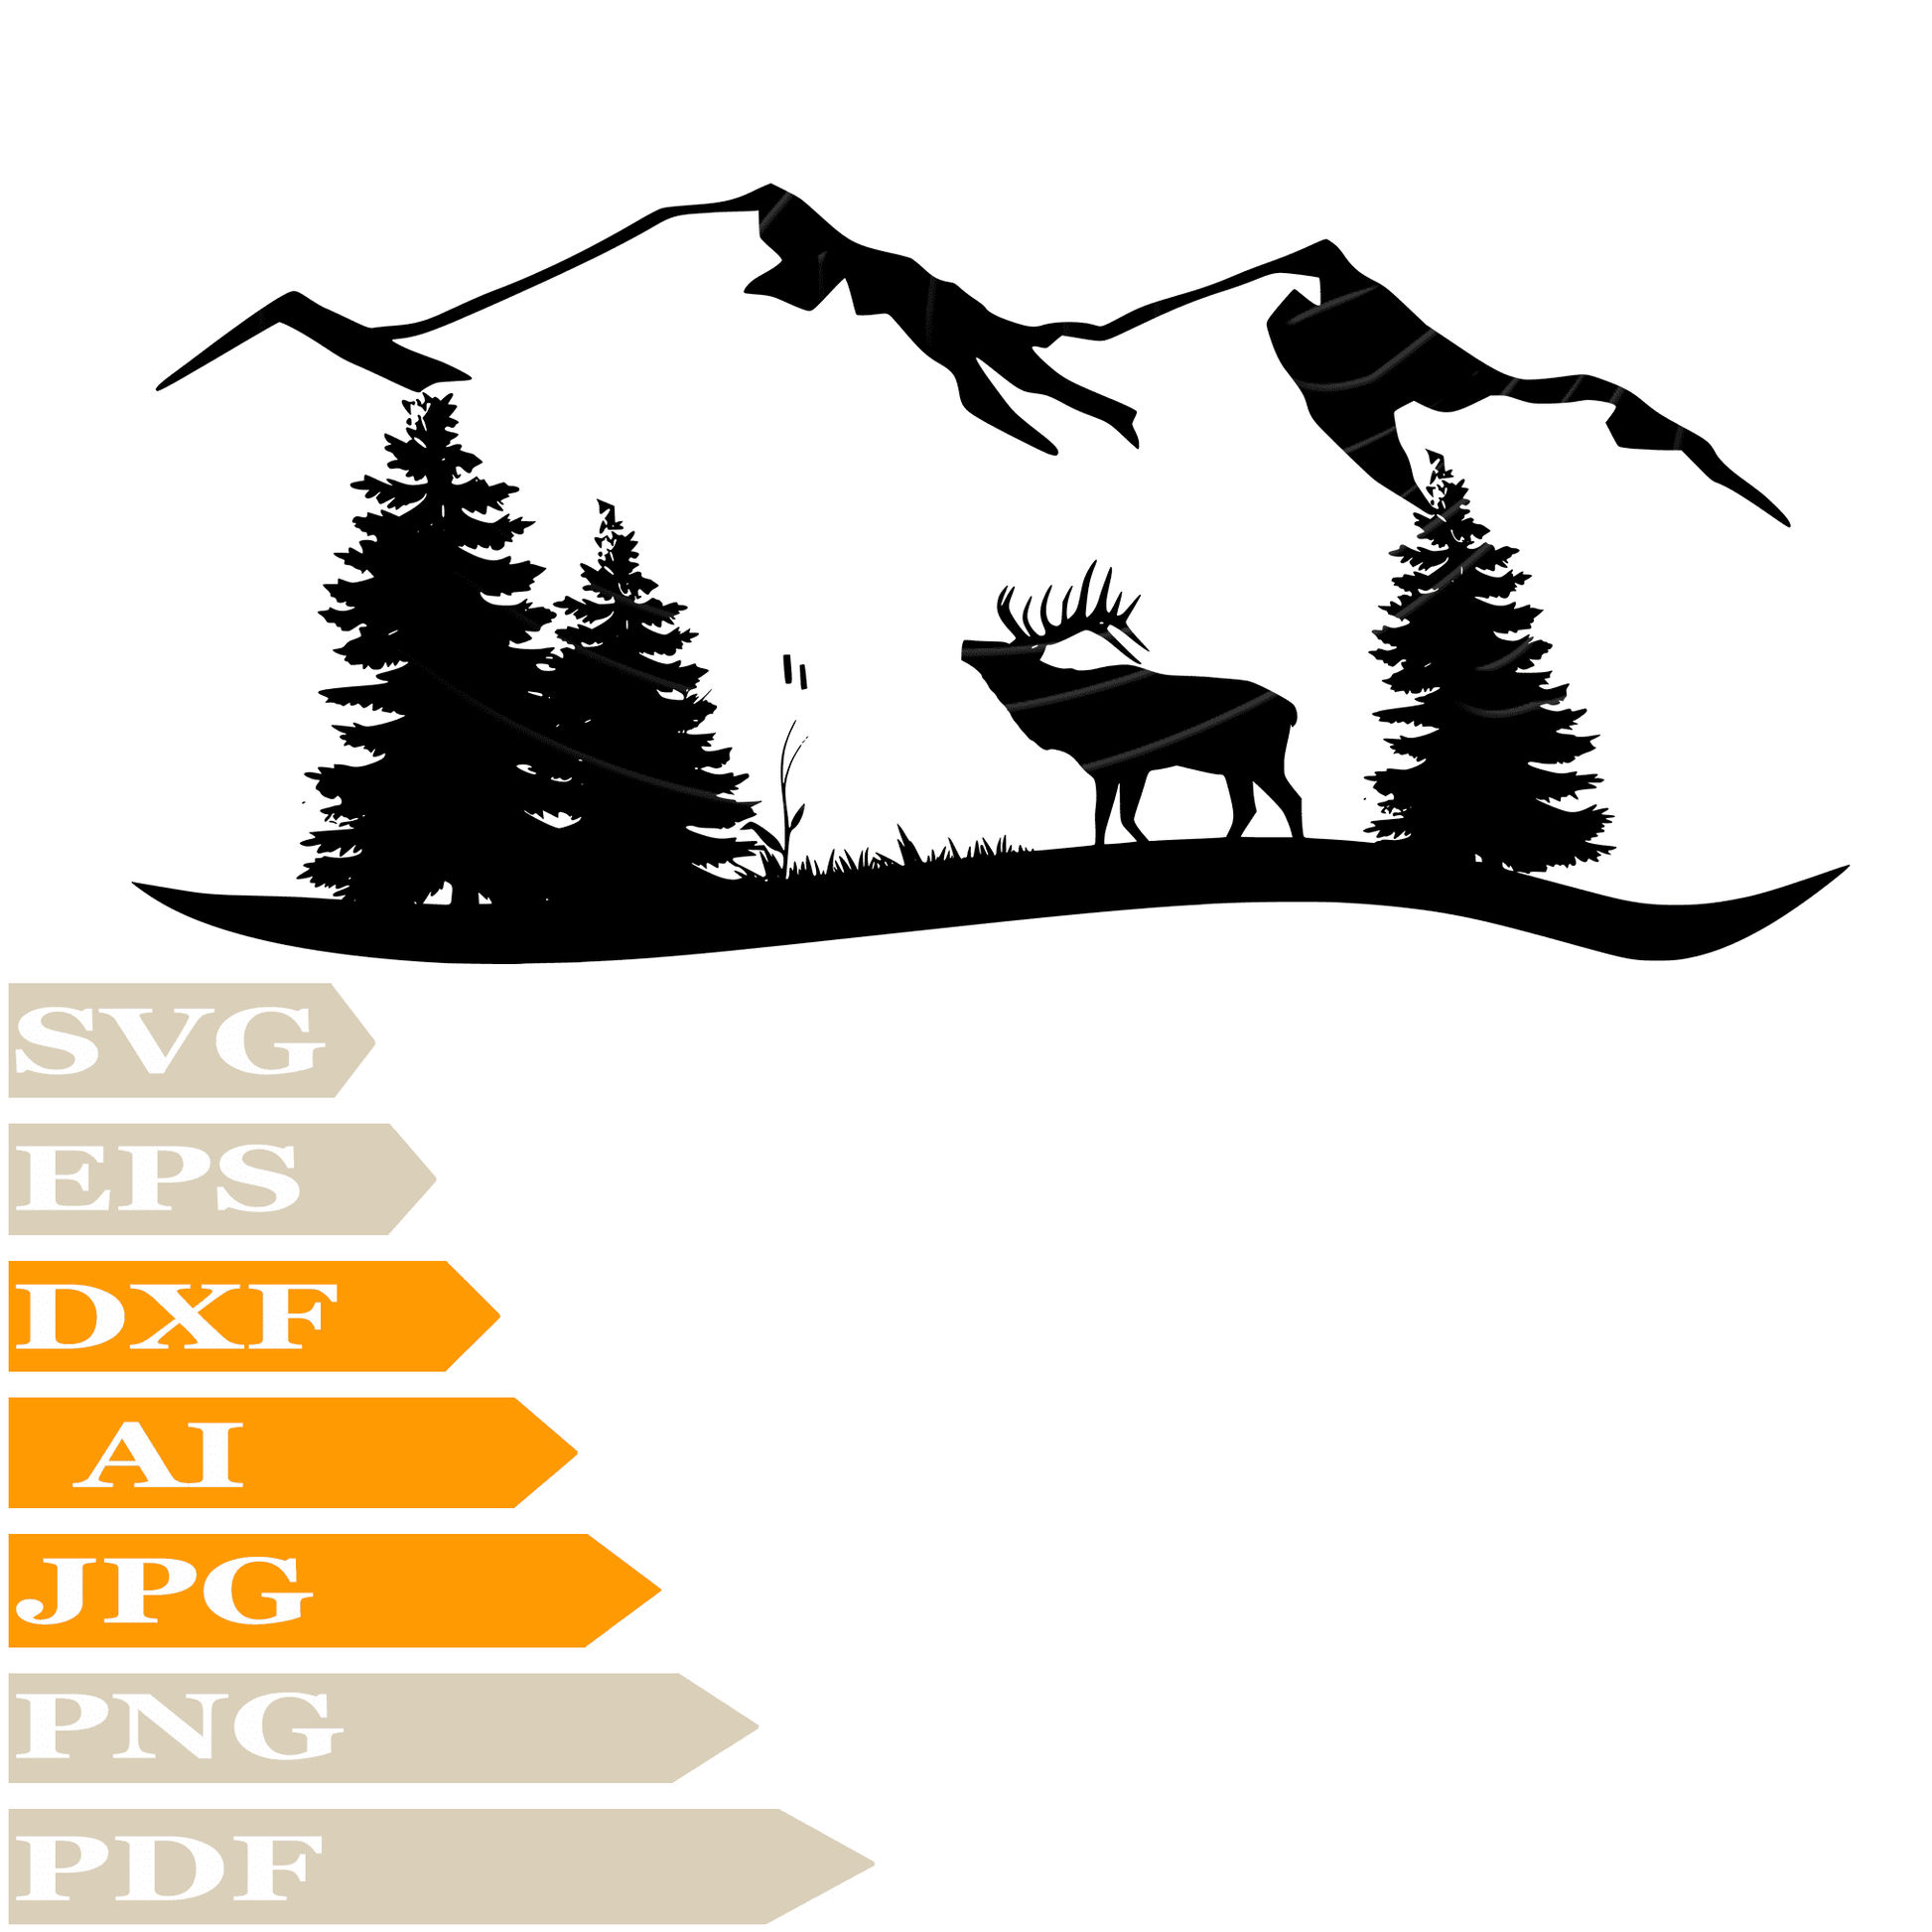 sofvintage-This Versatile Moose SVG File Features A Majestic Moose In A Forest Setting. Use It To Create Unique Designs For T-Shirts, Wall Stickers, Or Printable Graphics. Perfect For Nature Lovers And Outdoor Enthusiasts.